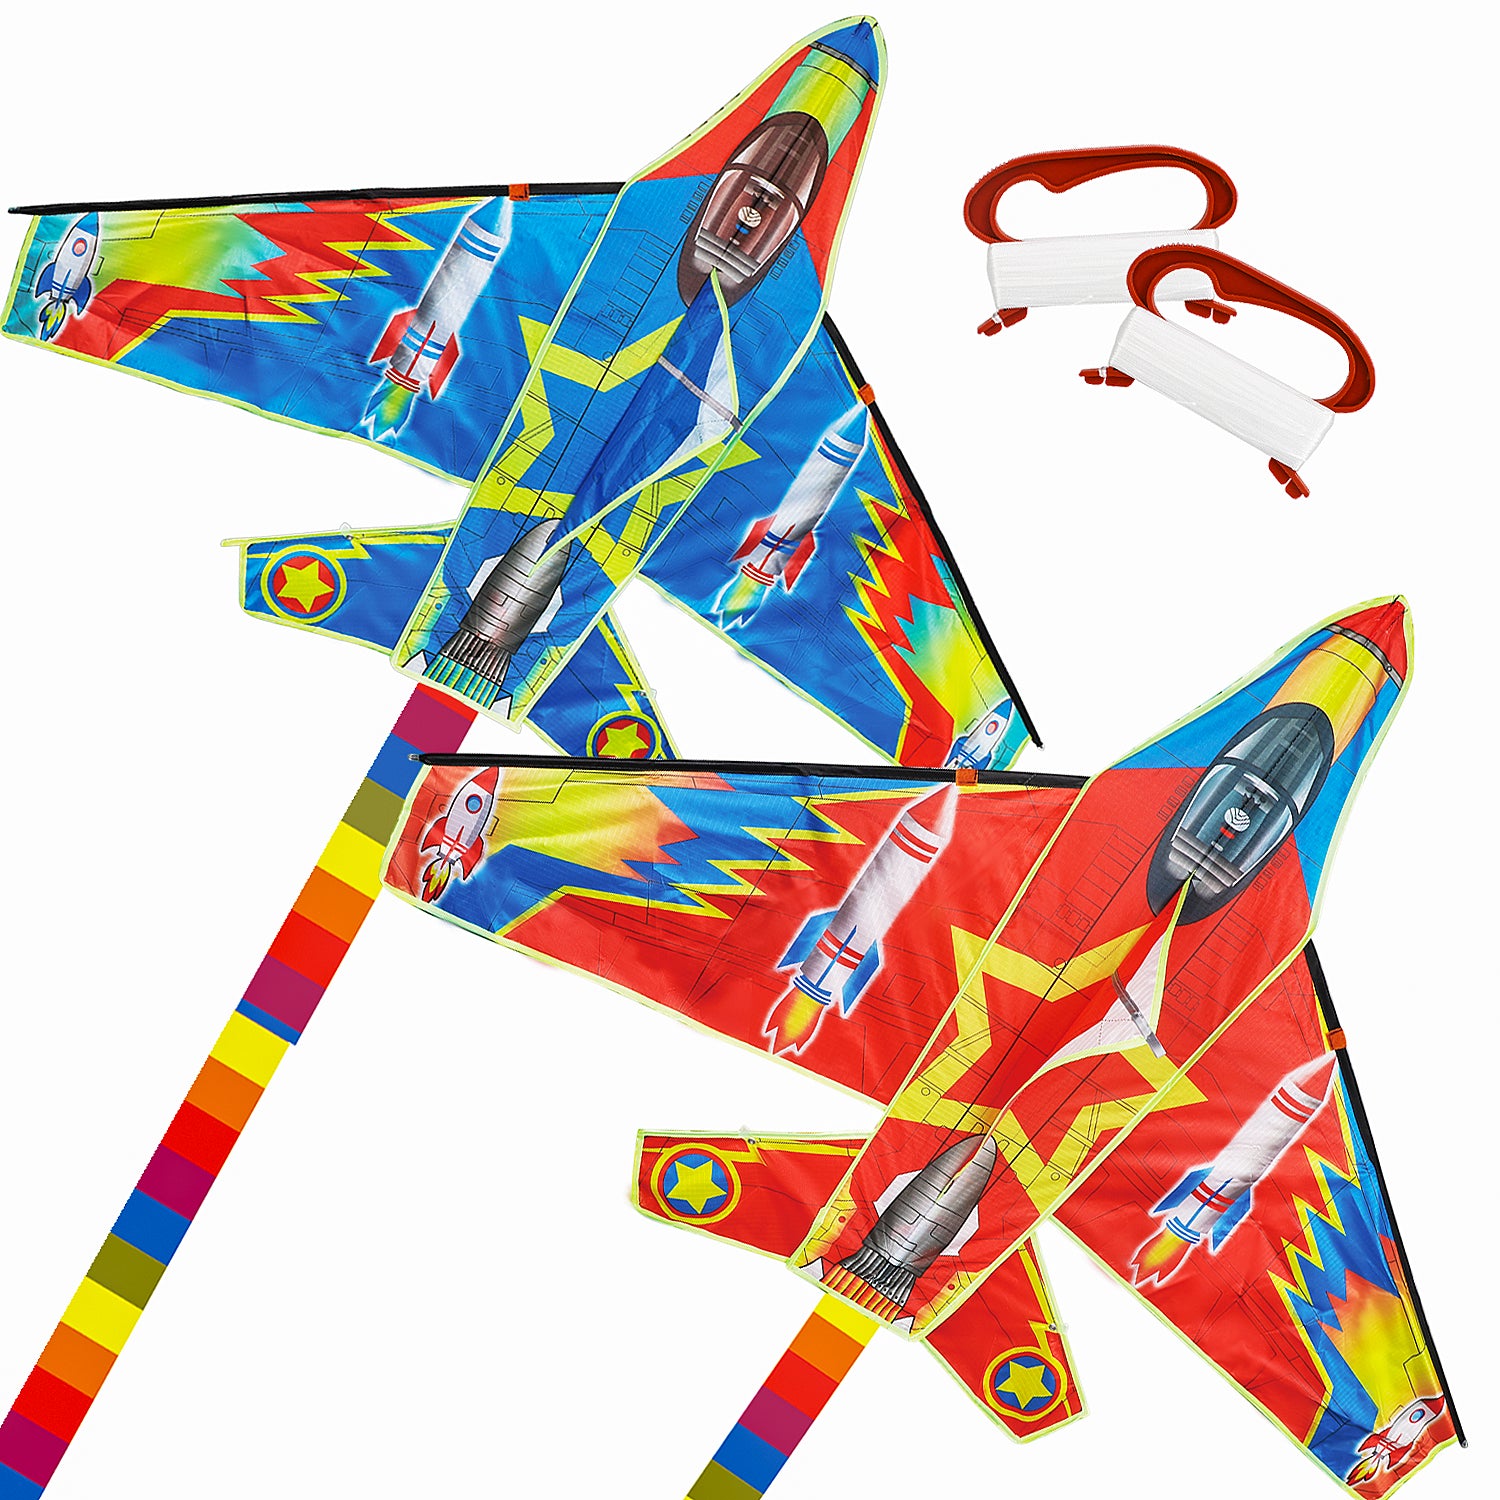 TOY Life 2 Pack Airplane Large Kites for Adults Kids Ages 4-8 8-12 Easy